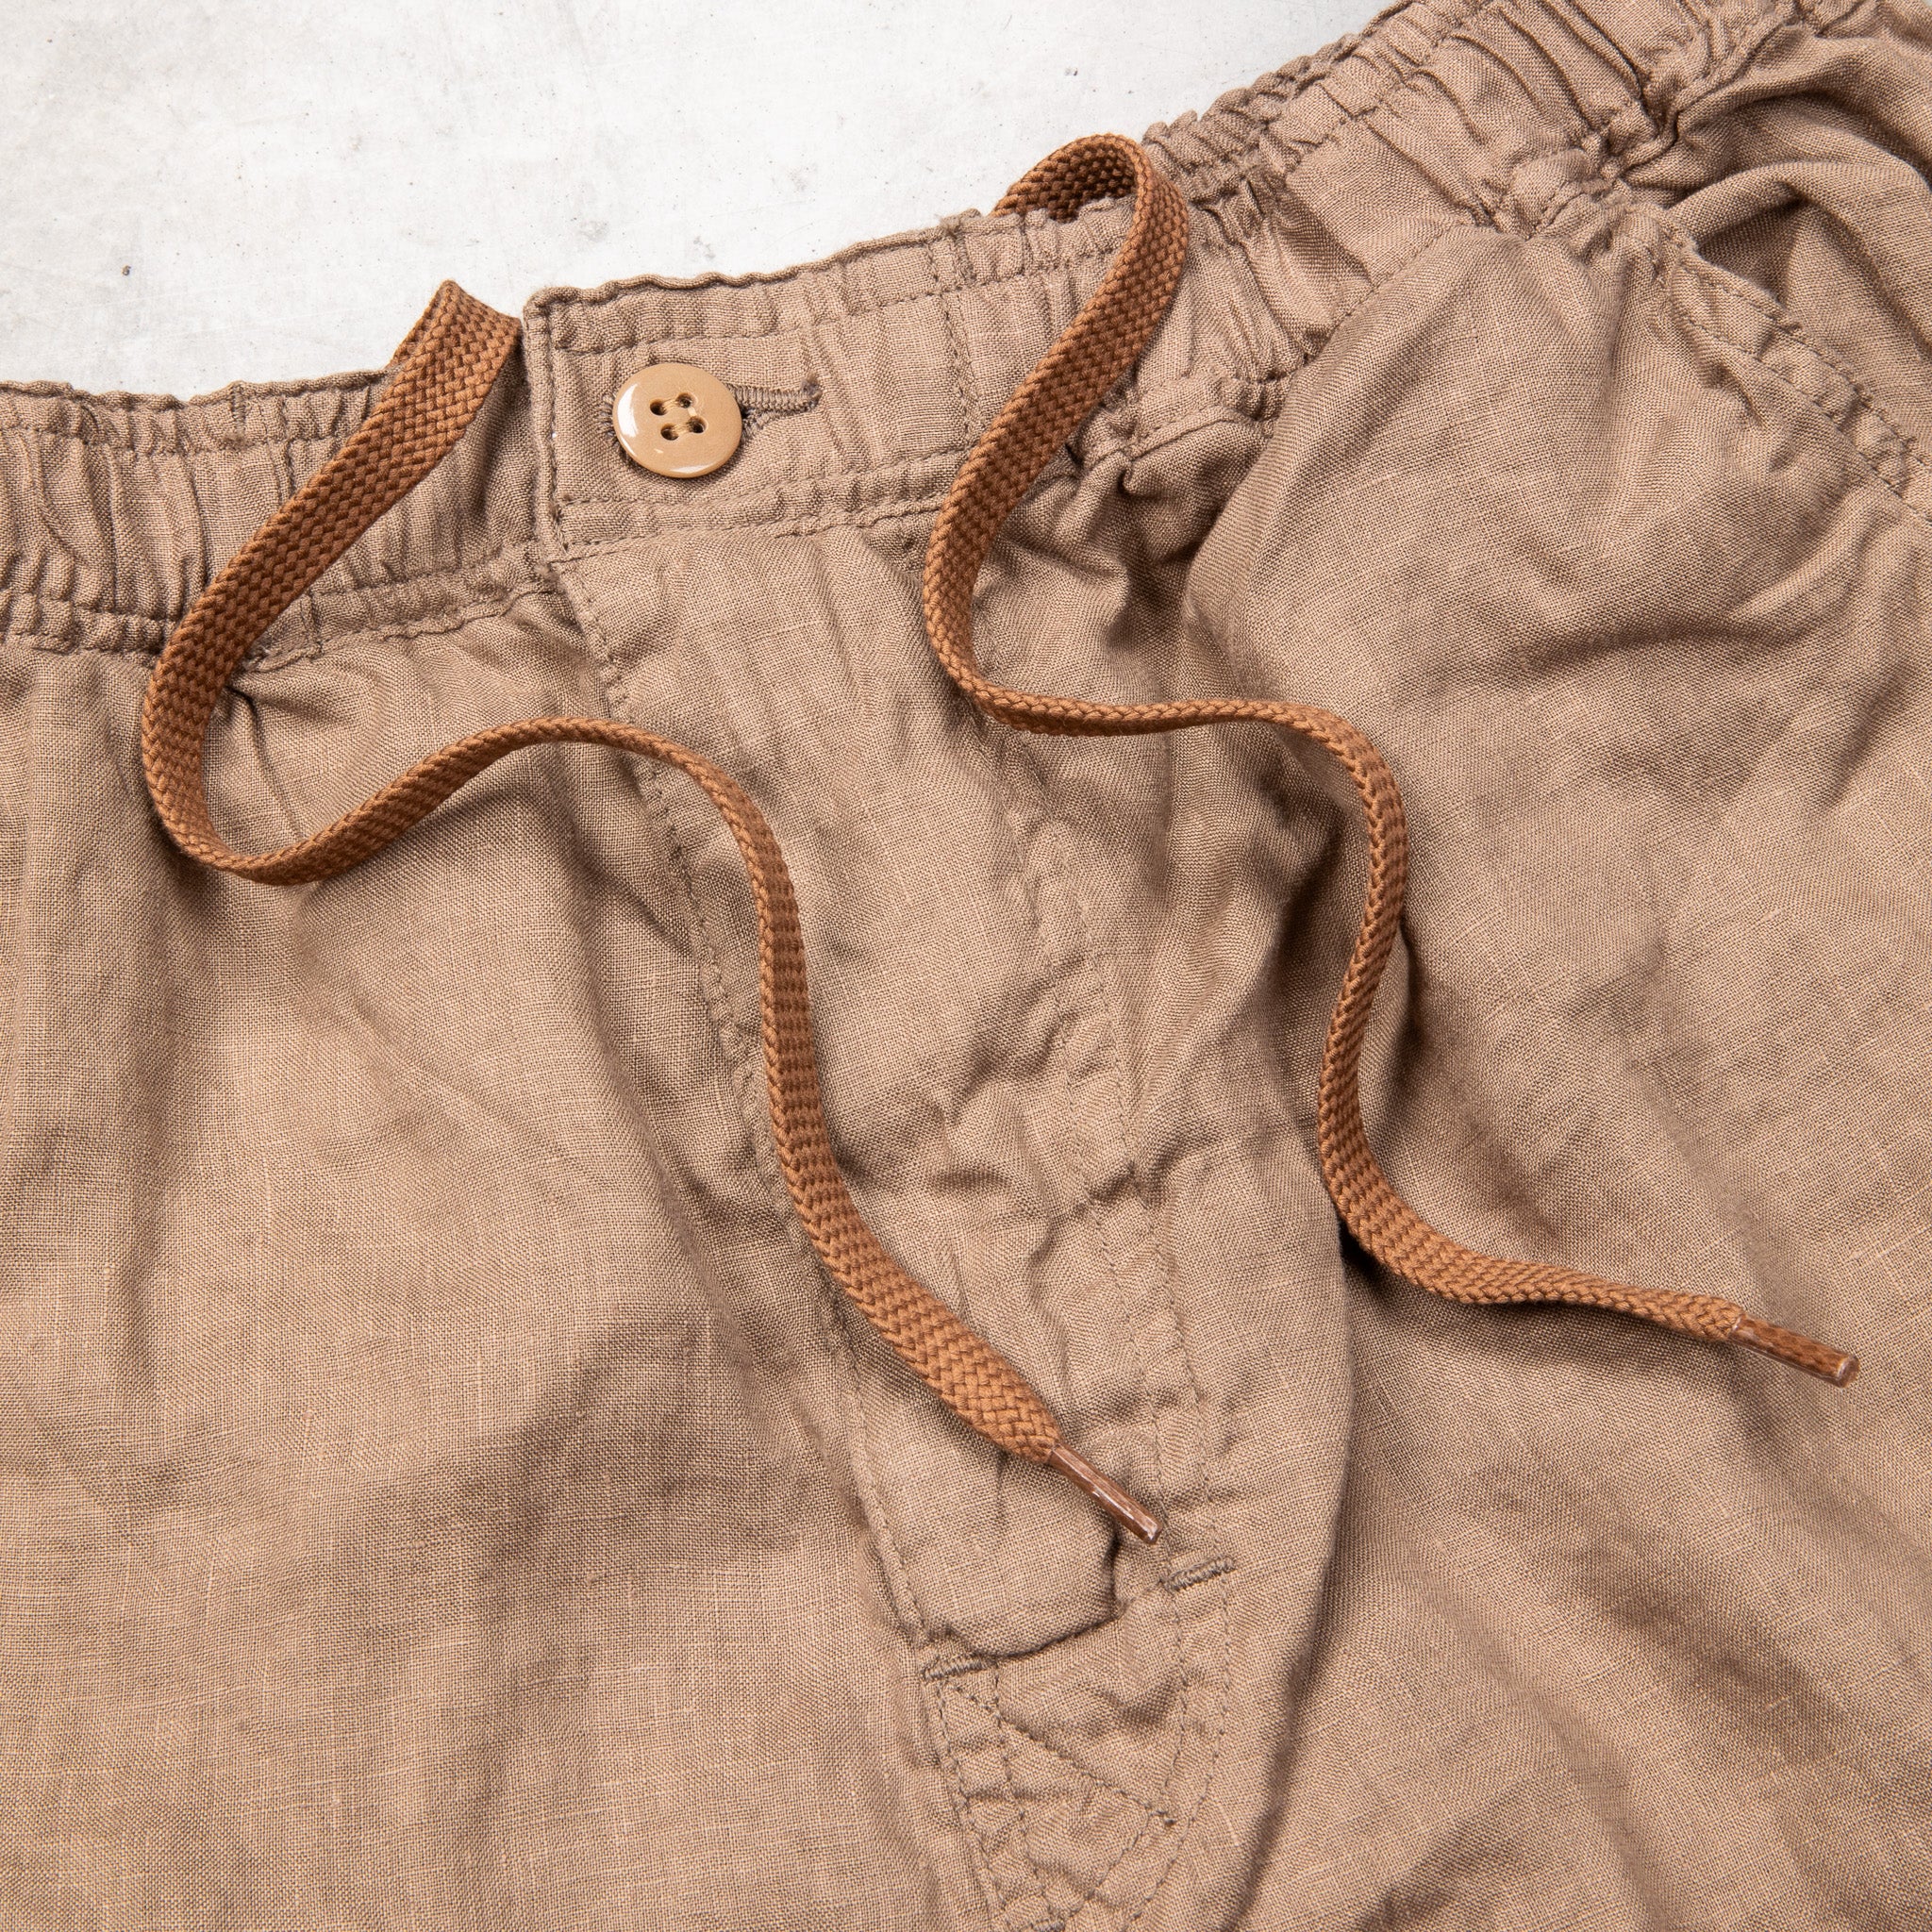 Remi Relief Linen Shorts Brown